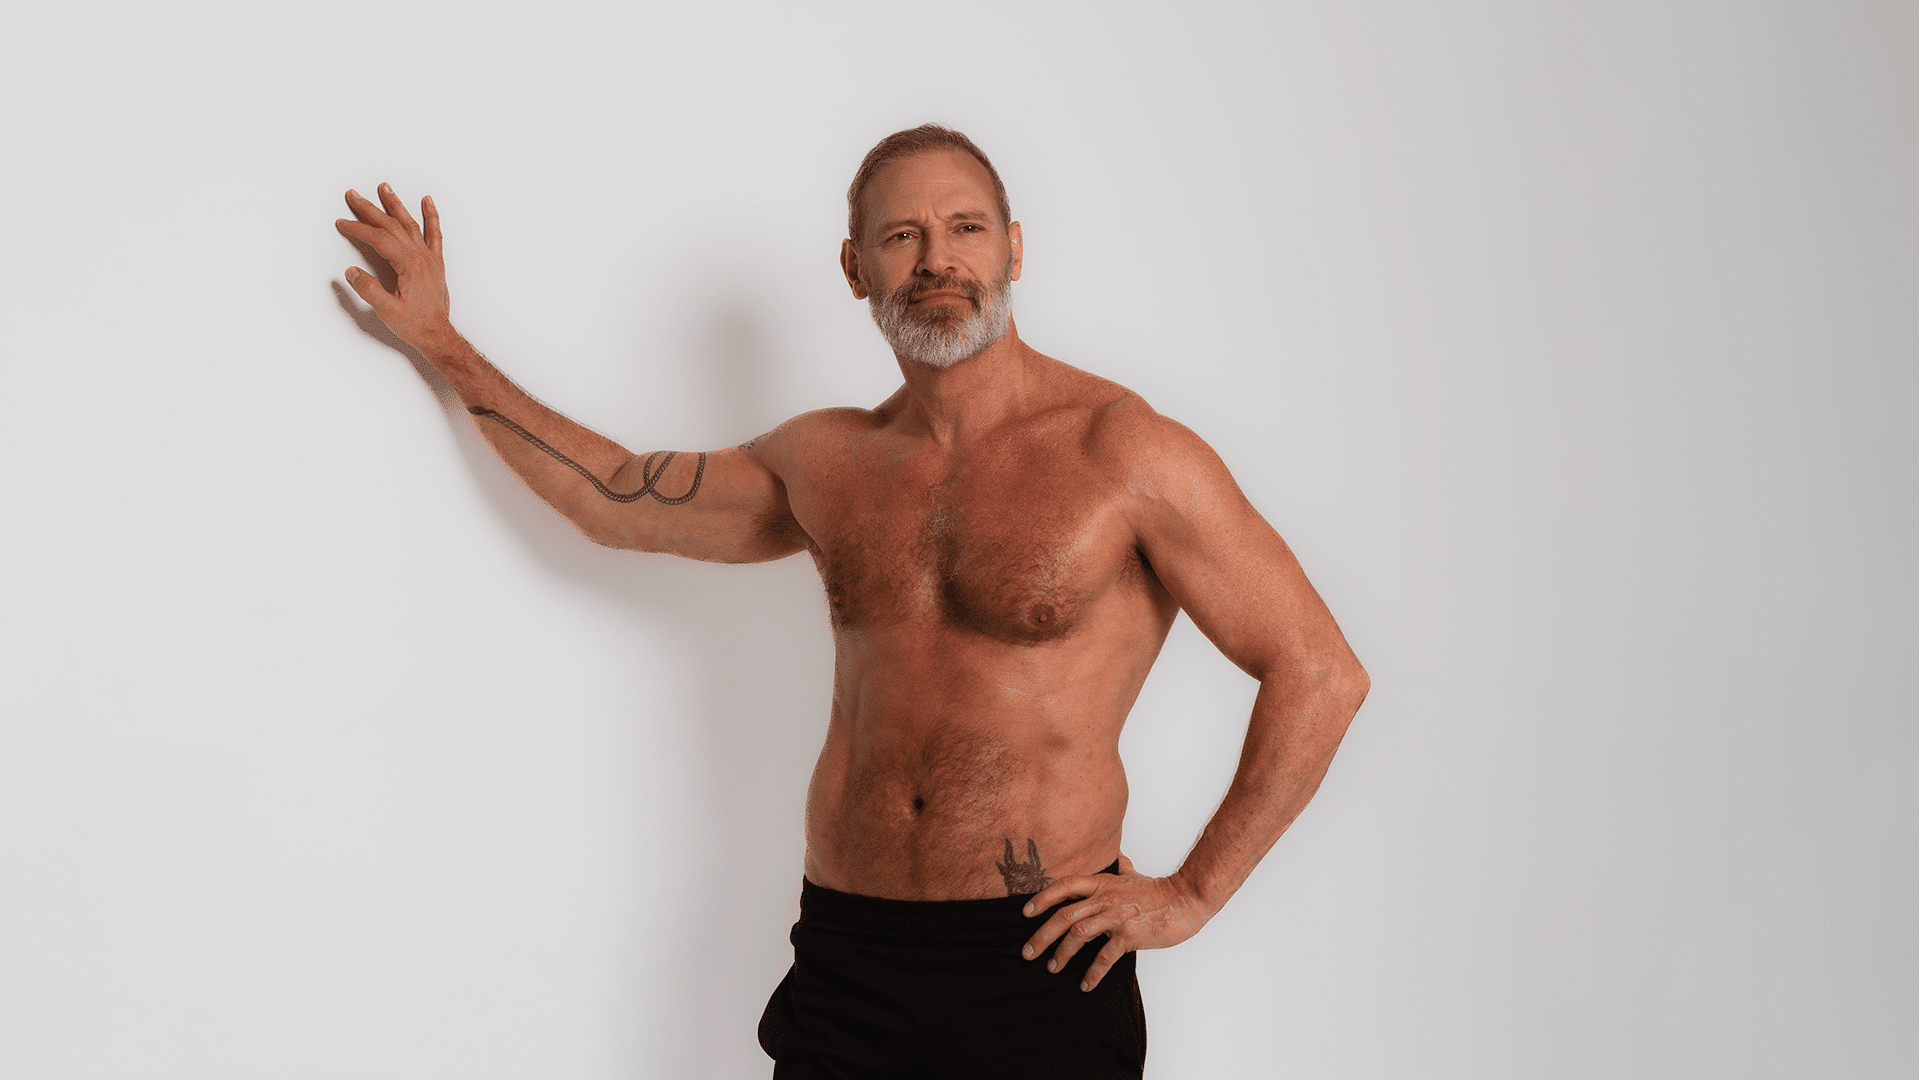 intermittent fasting for men over 50